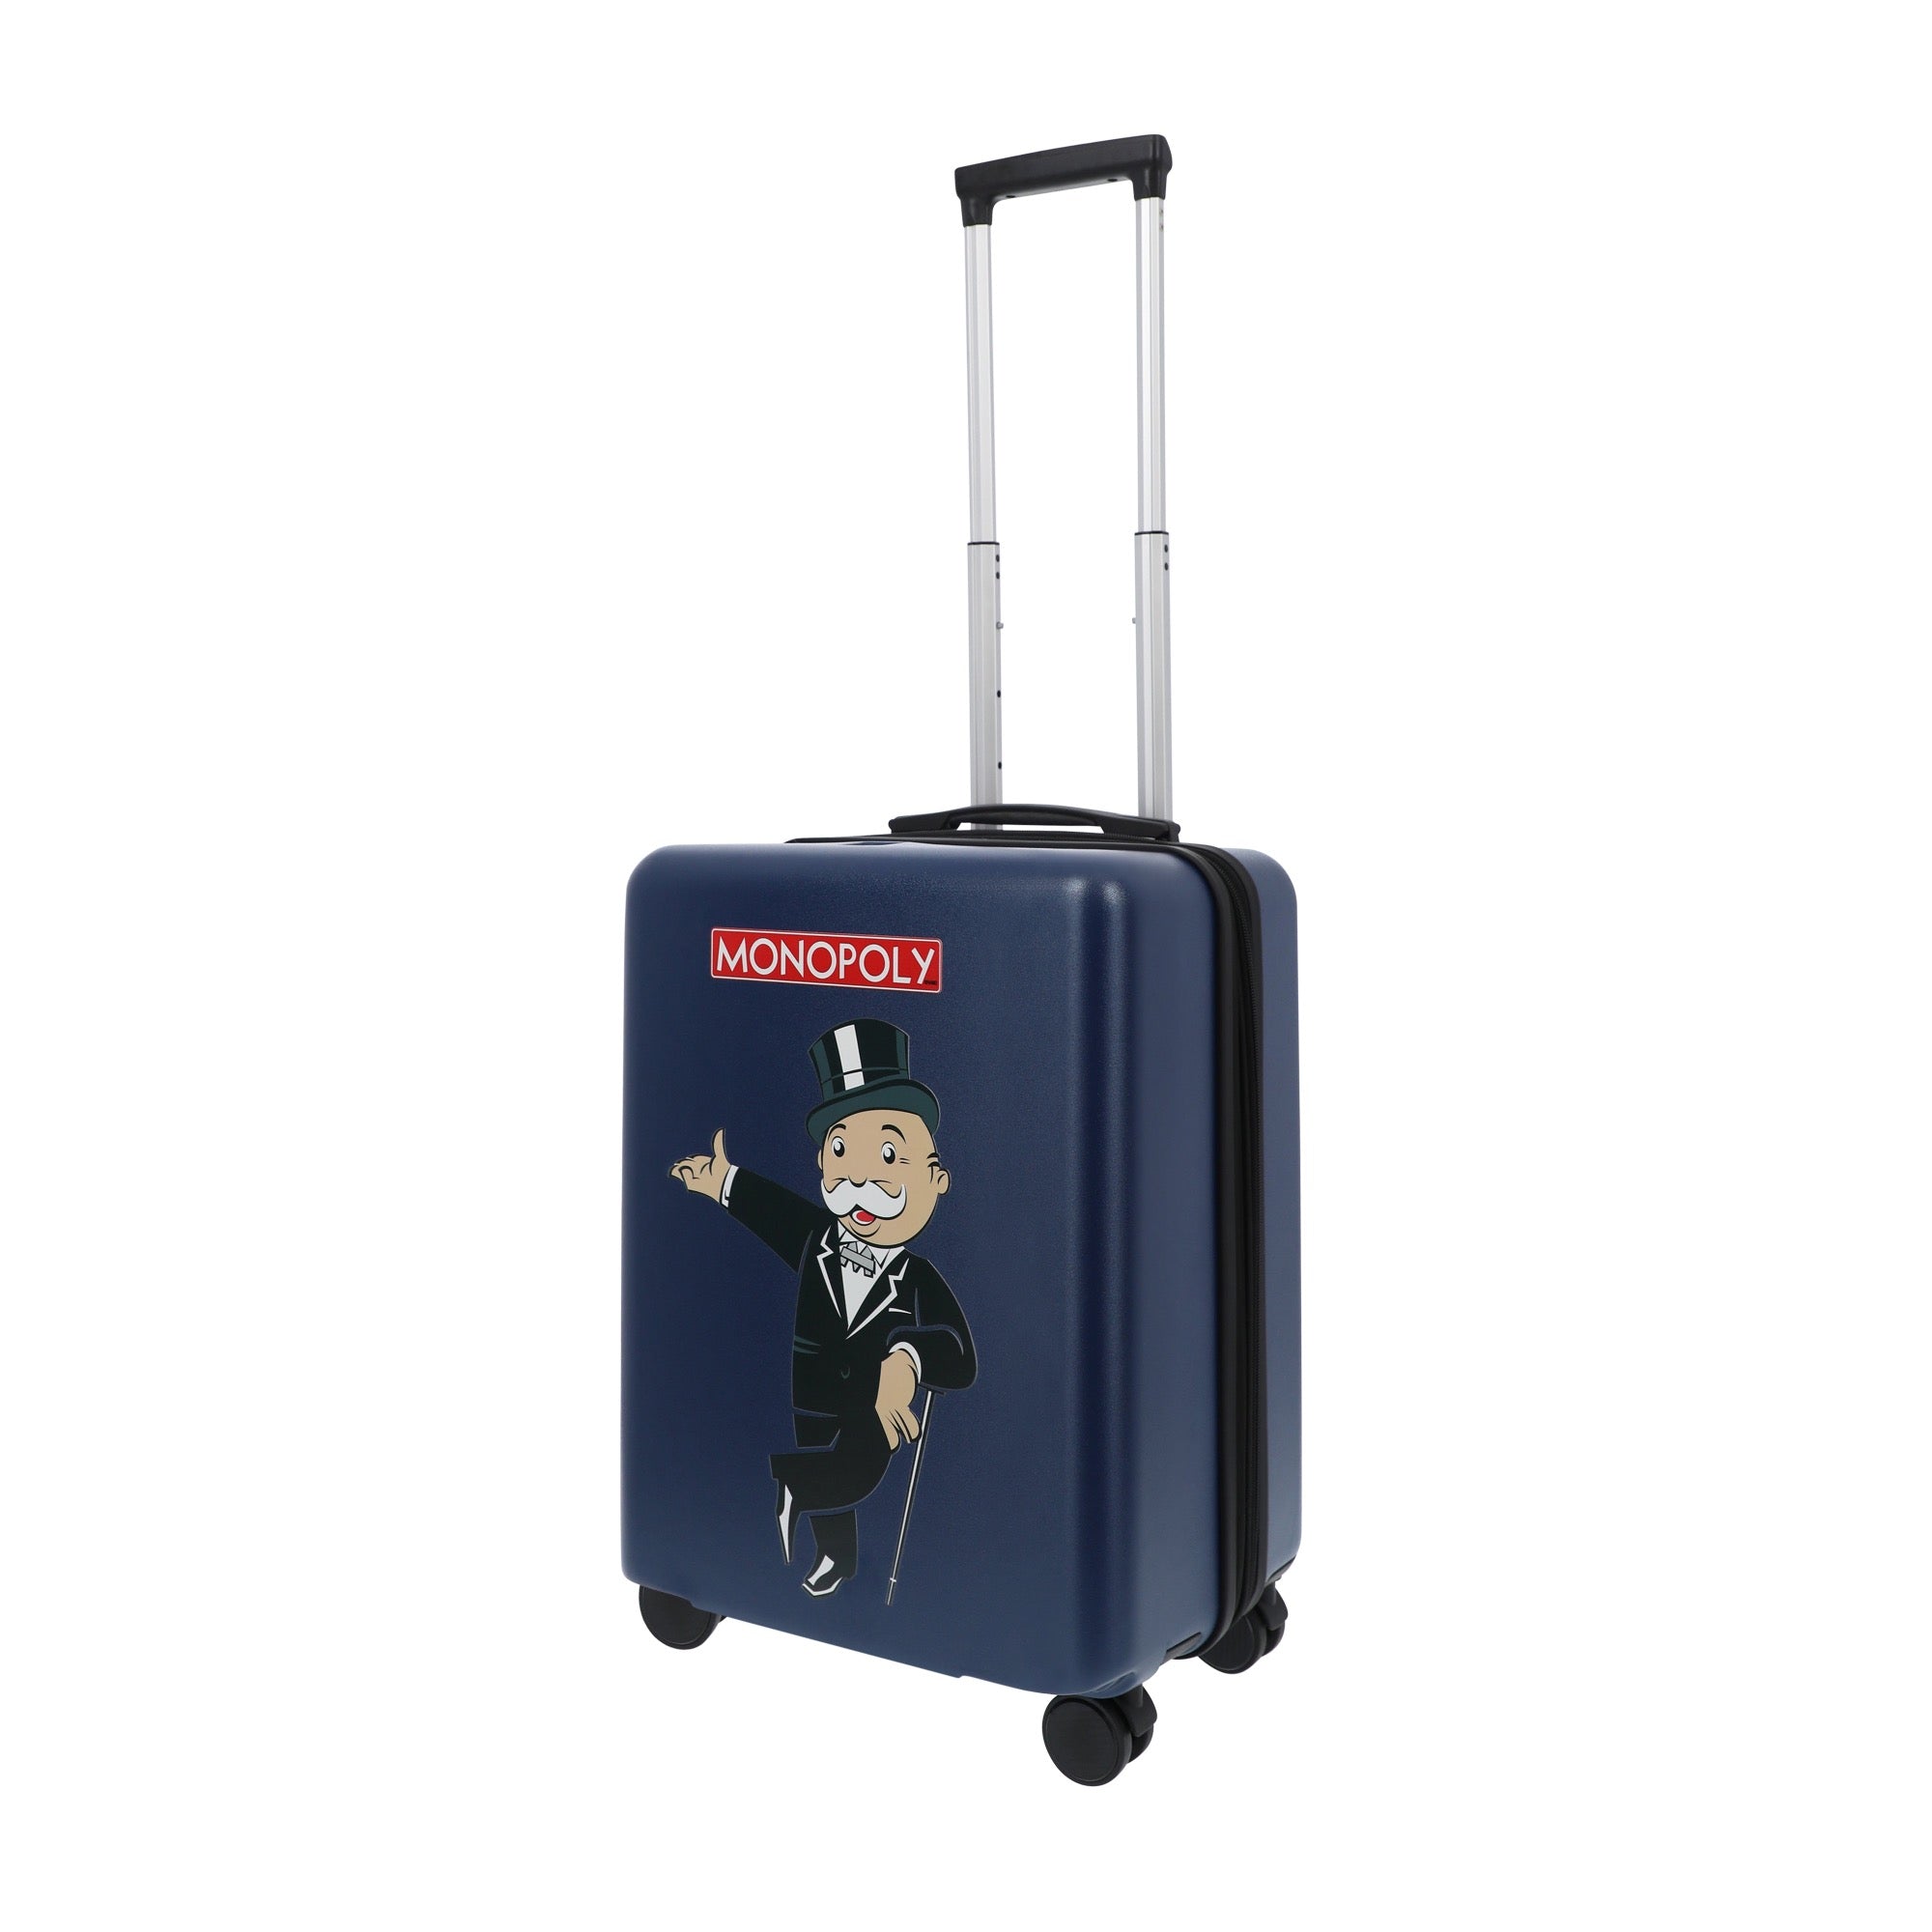 Navy blue hasbro monopoly 22.5" carry-on spinner suitcase luggage by Ful